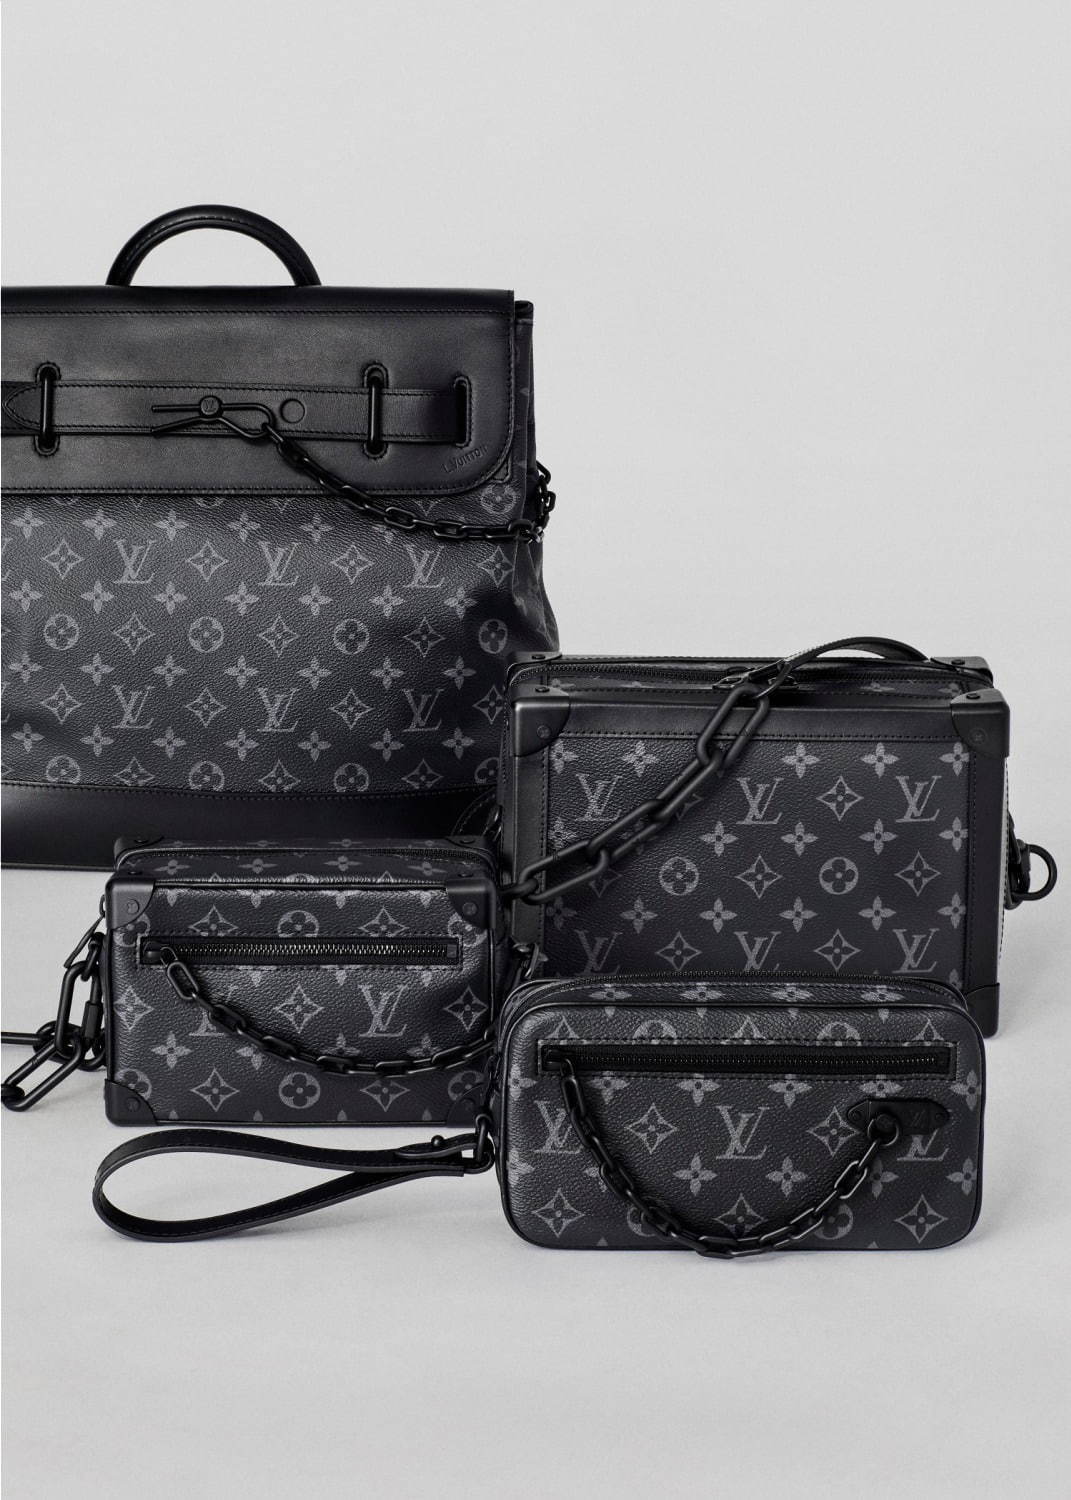 LOUIS VUITTON☆ ルイヴィトン☆エクリプス☆トートバッグ☆